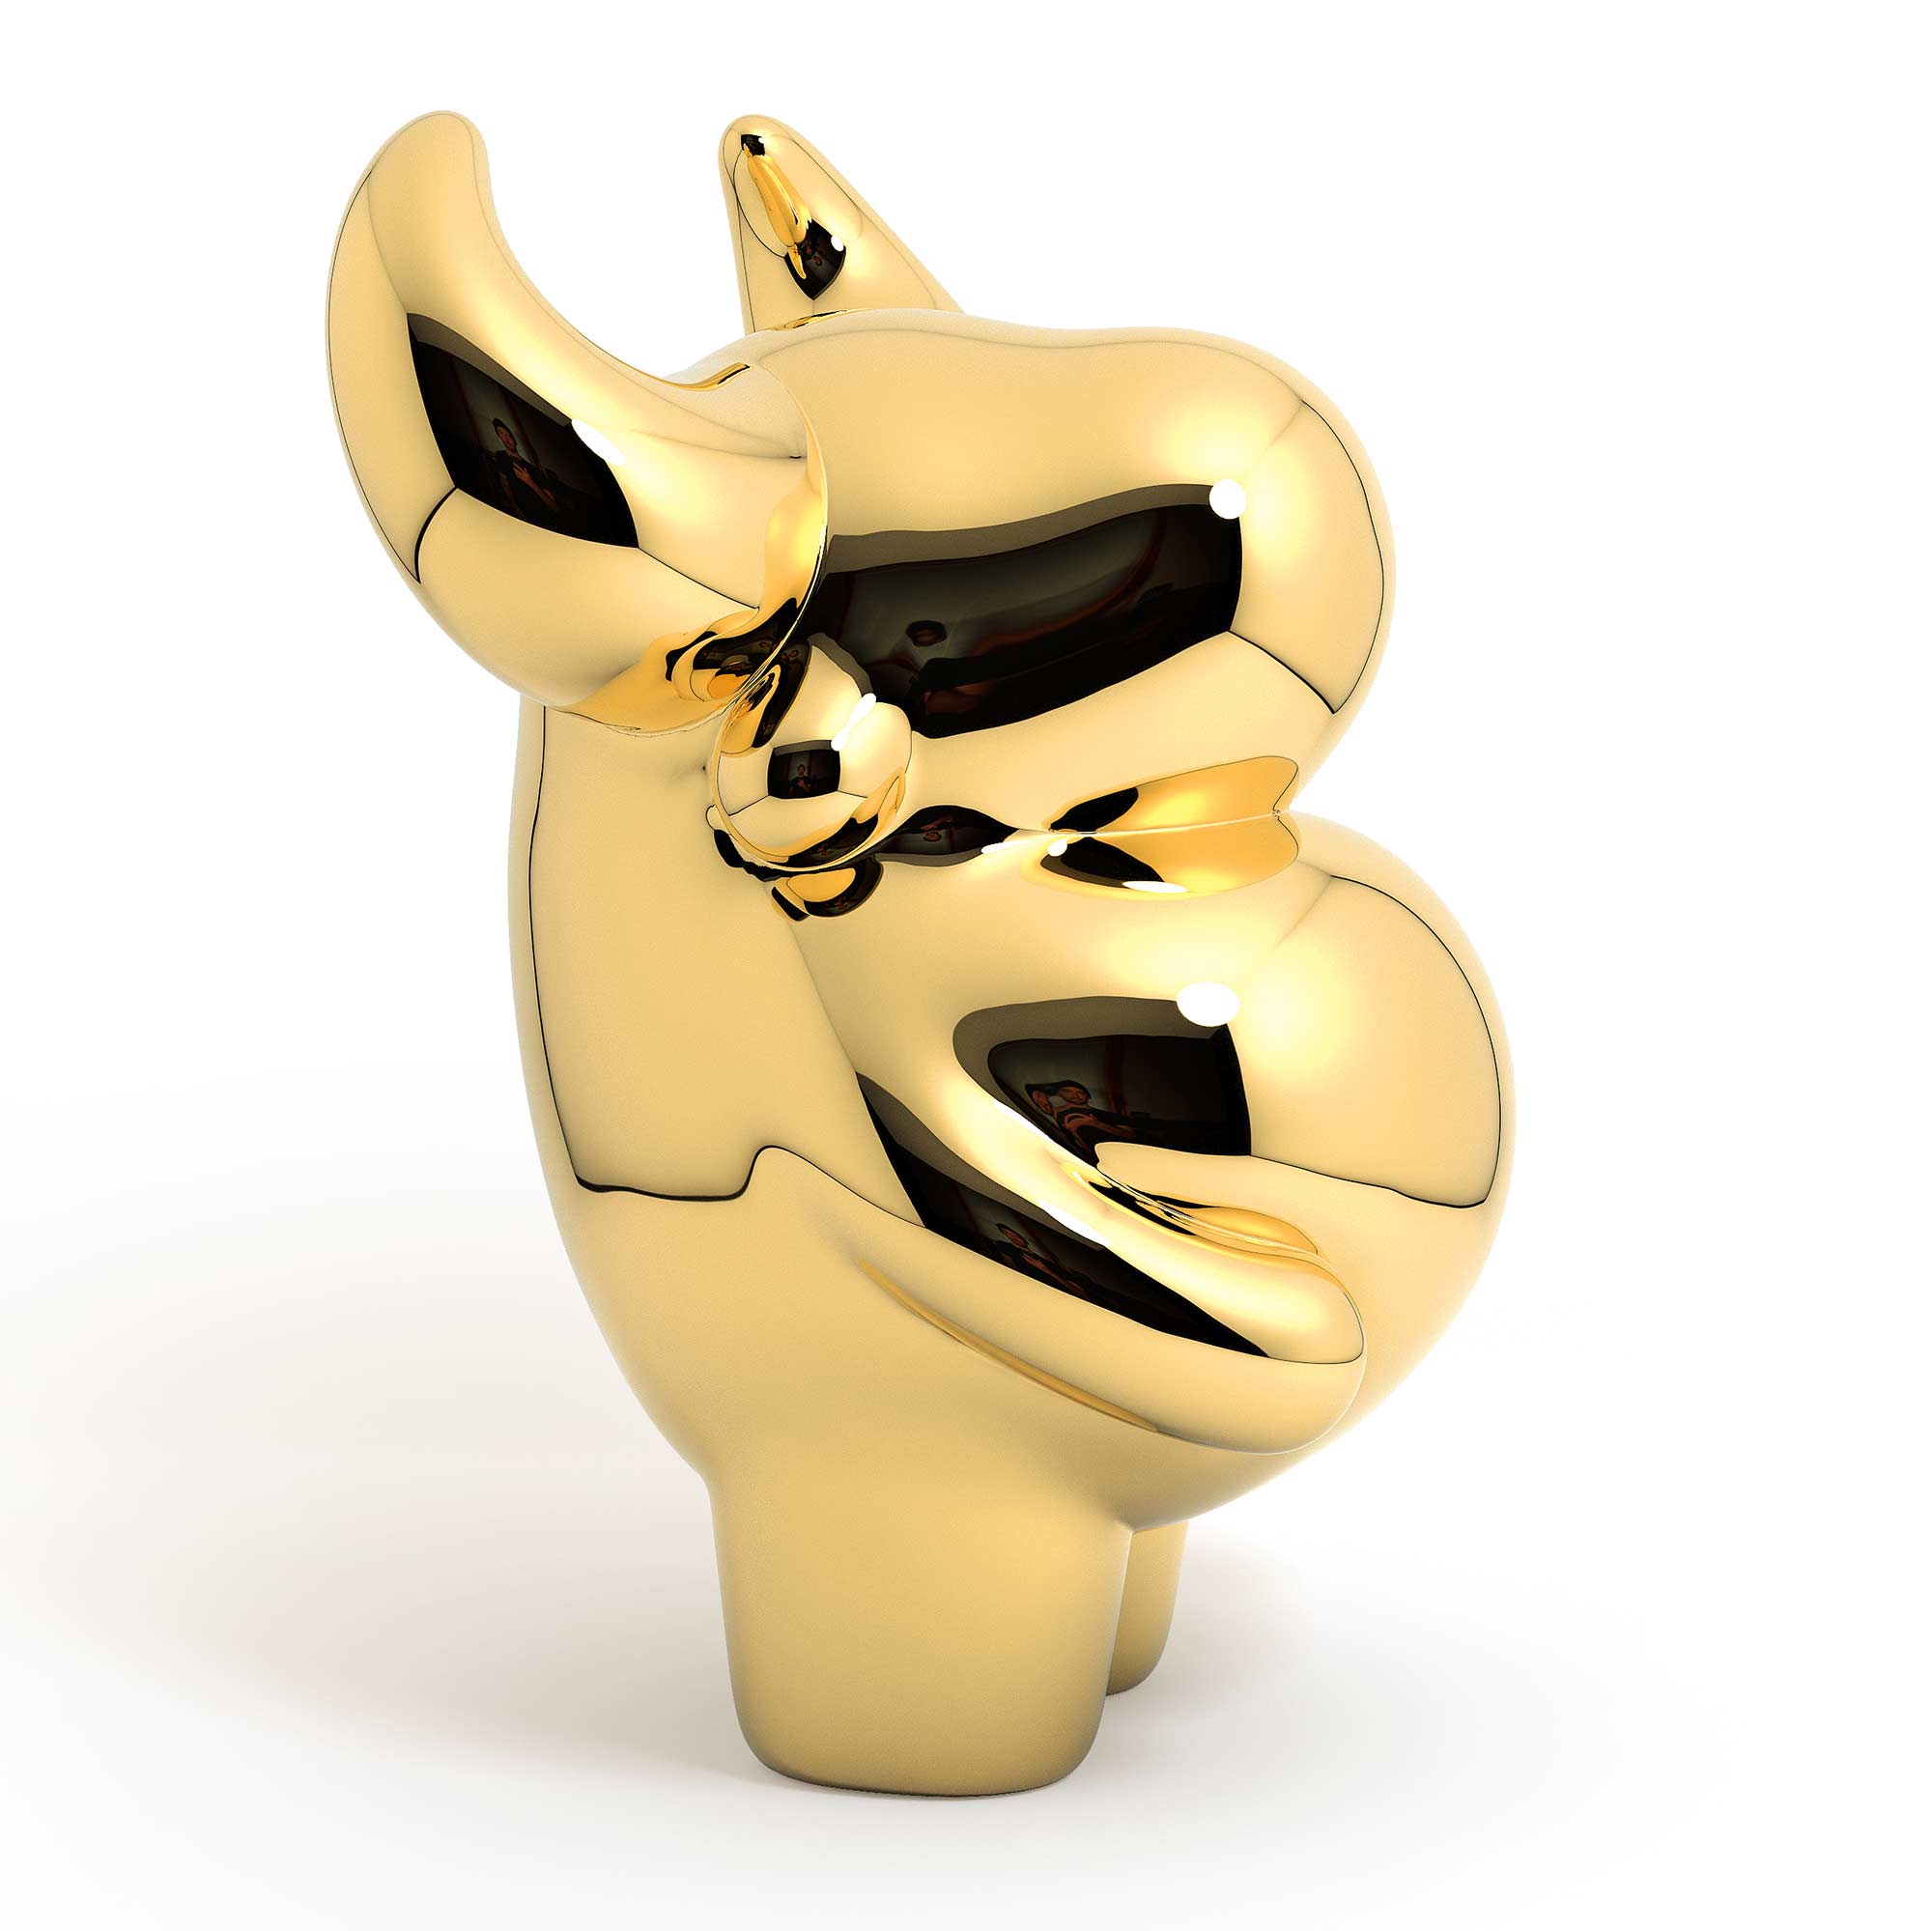 OX “prosperous” bull sculpture, gold plated Mirror Polished Stainless Steel Sculpture, by artist Ferdi B Dick, side view